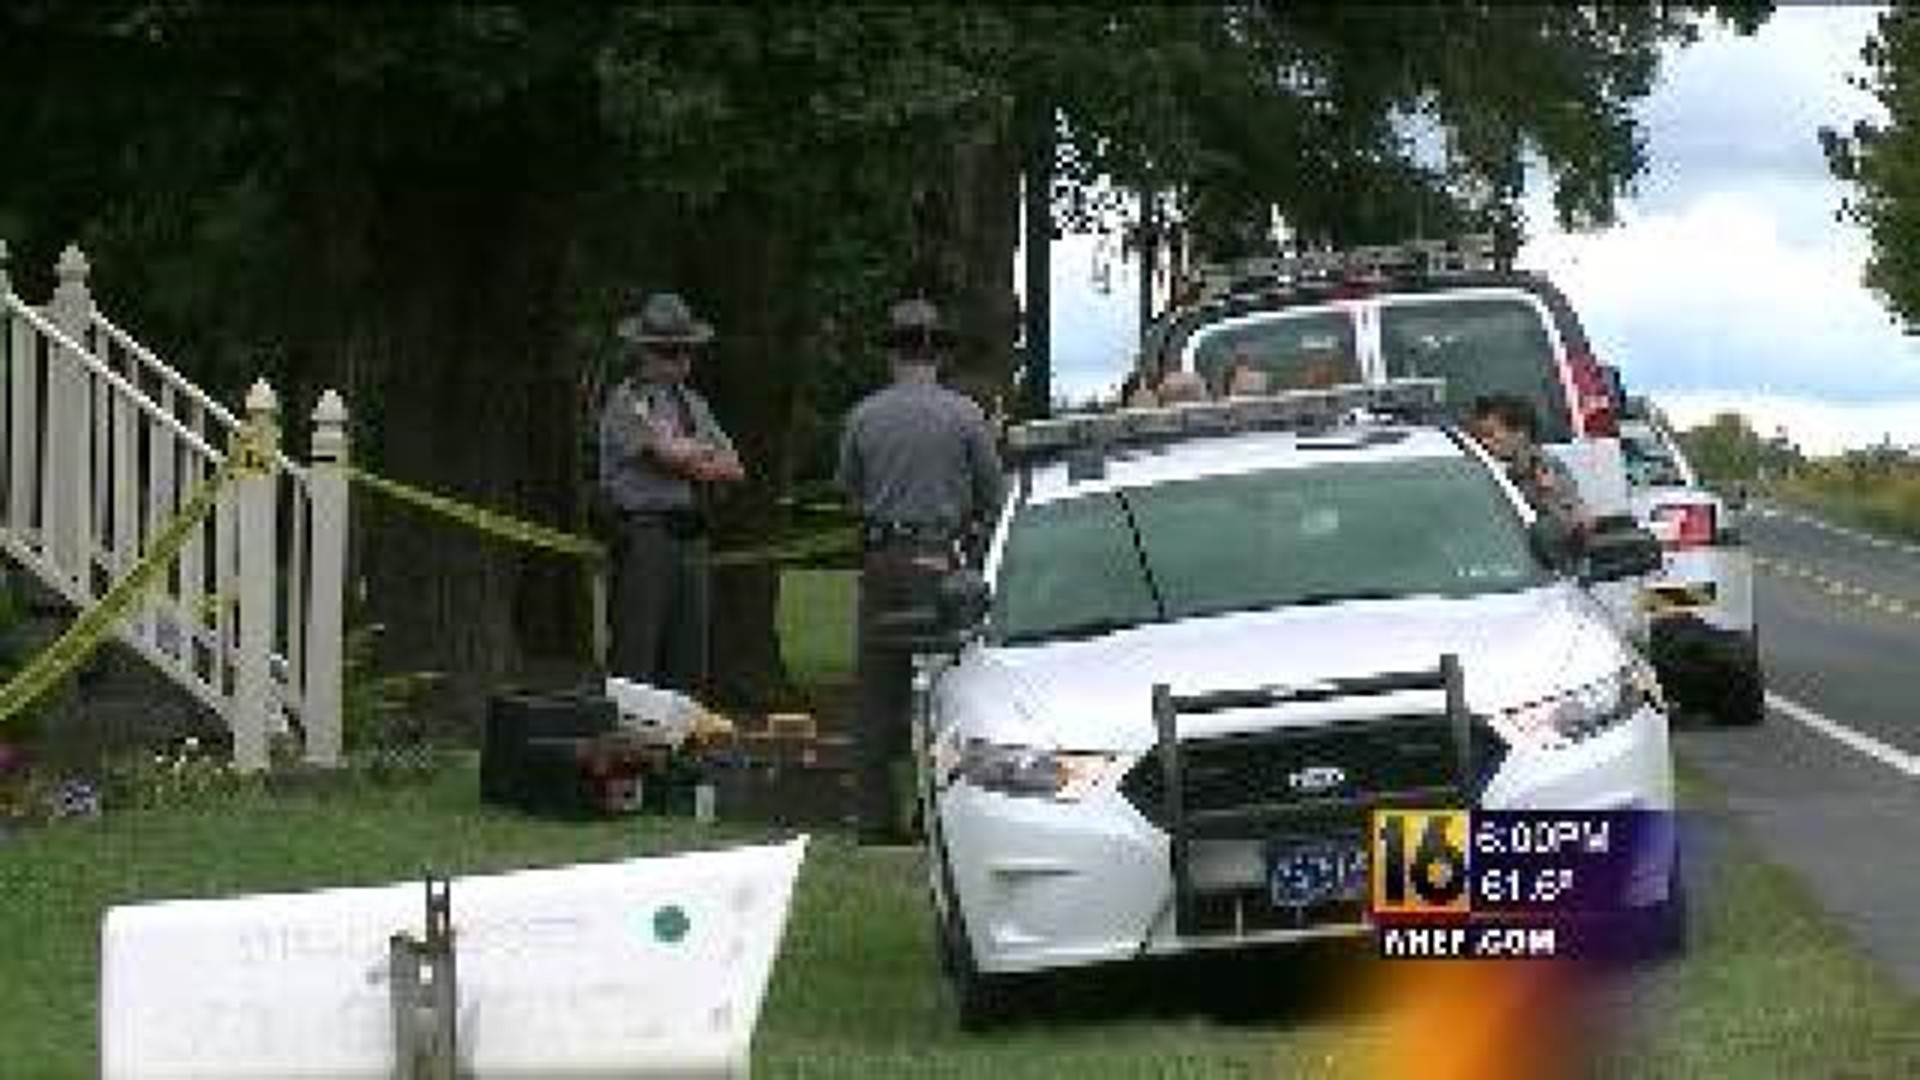 Neighbors Concerned After Couple Shot In Tioga County